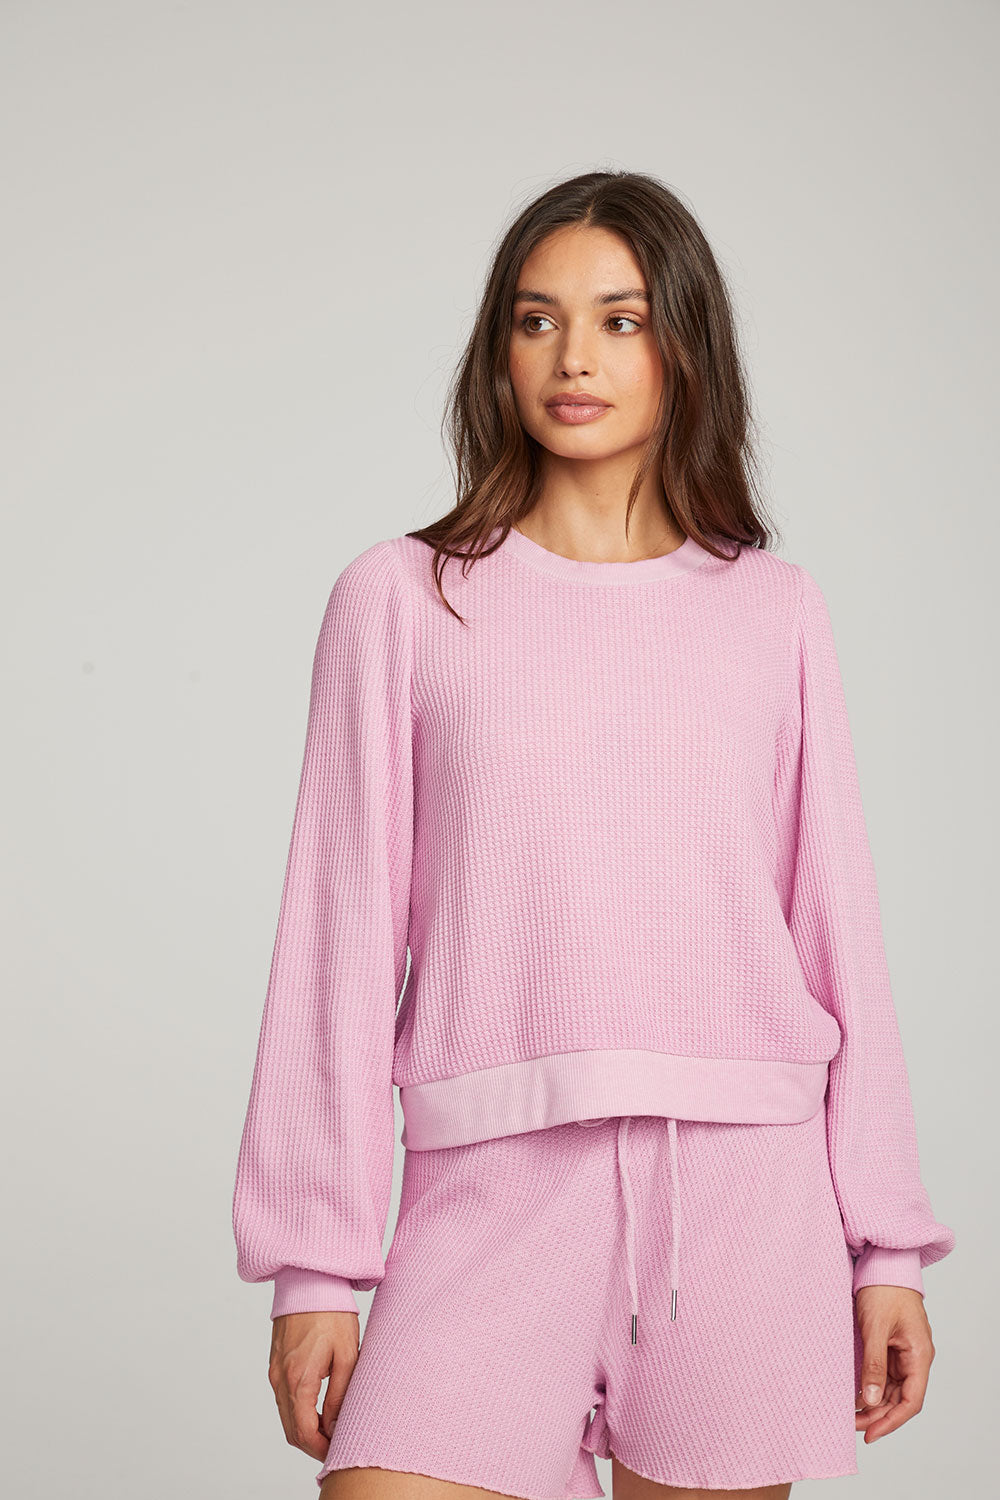 Owlsey Pastel Lavender Pullover WOMENS chaserbrand